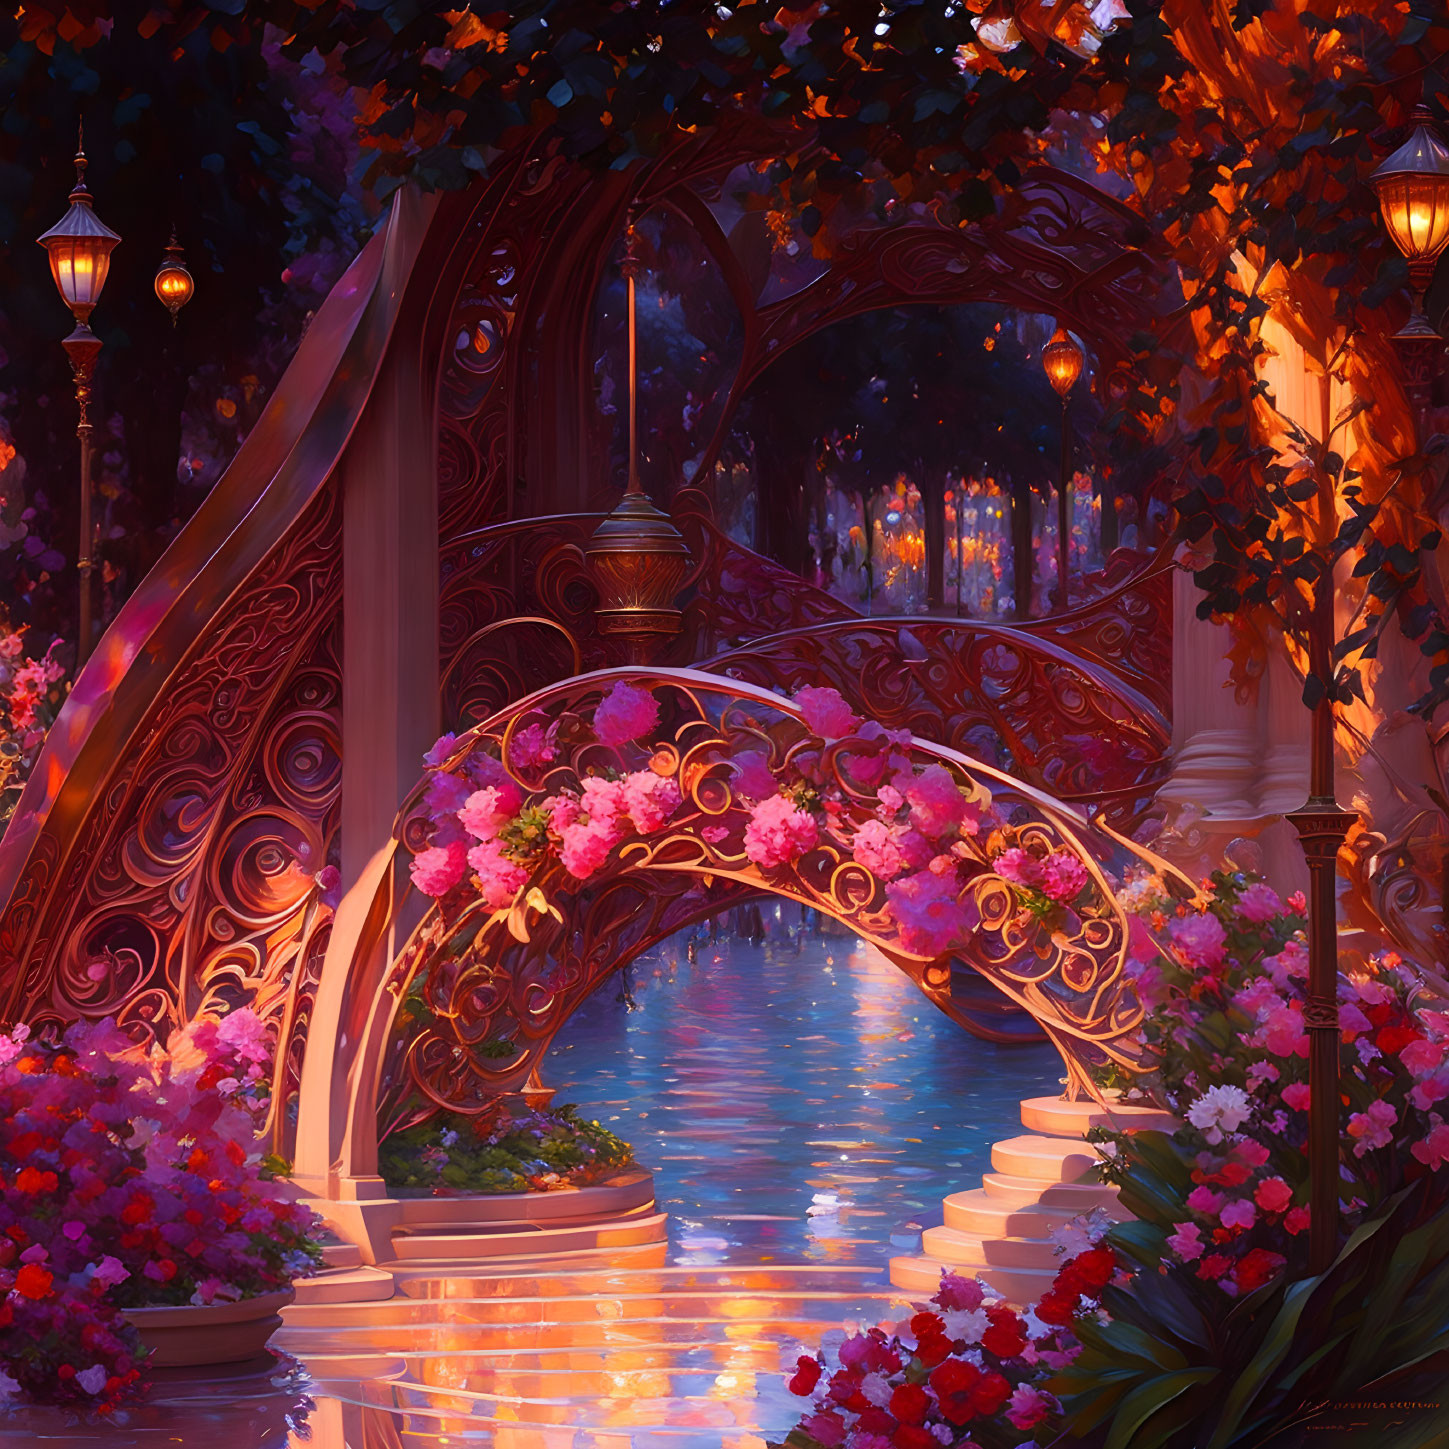 Ornate illuminated bridge with pink flowers over tranquil river at twilight